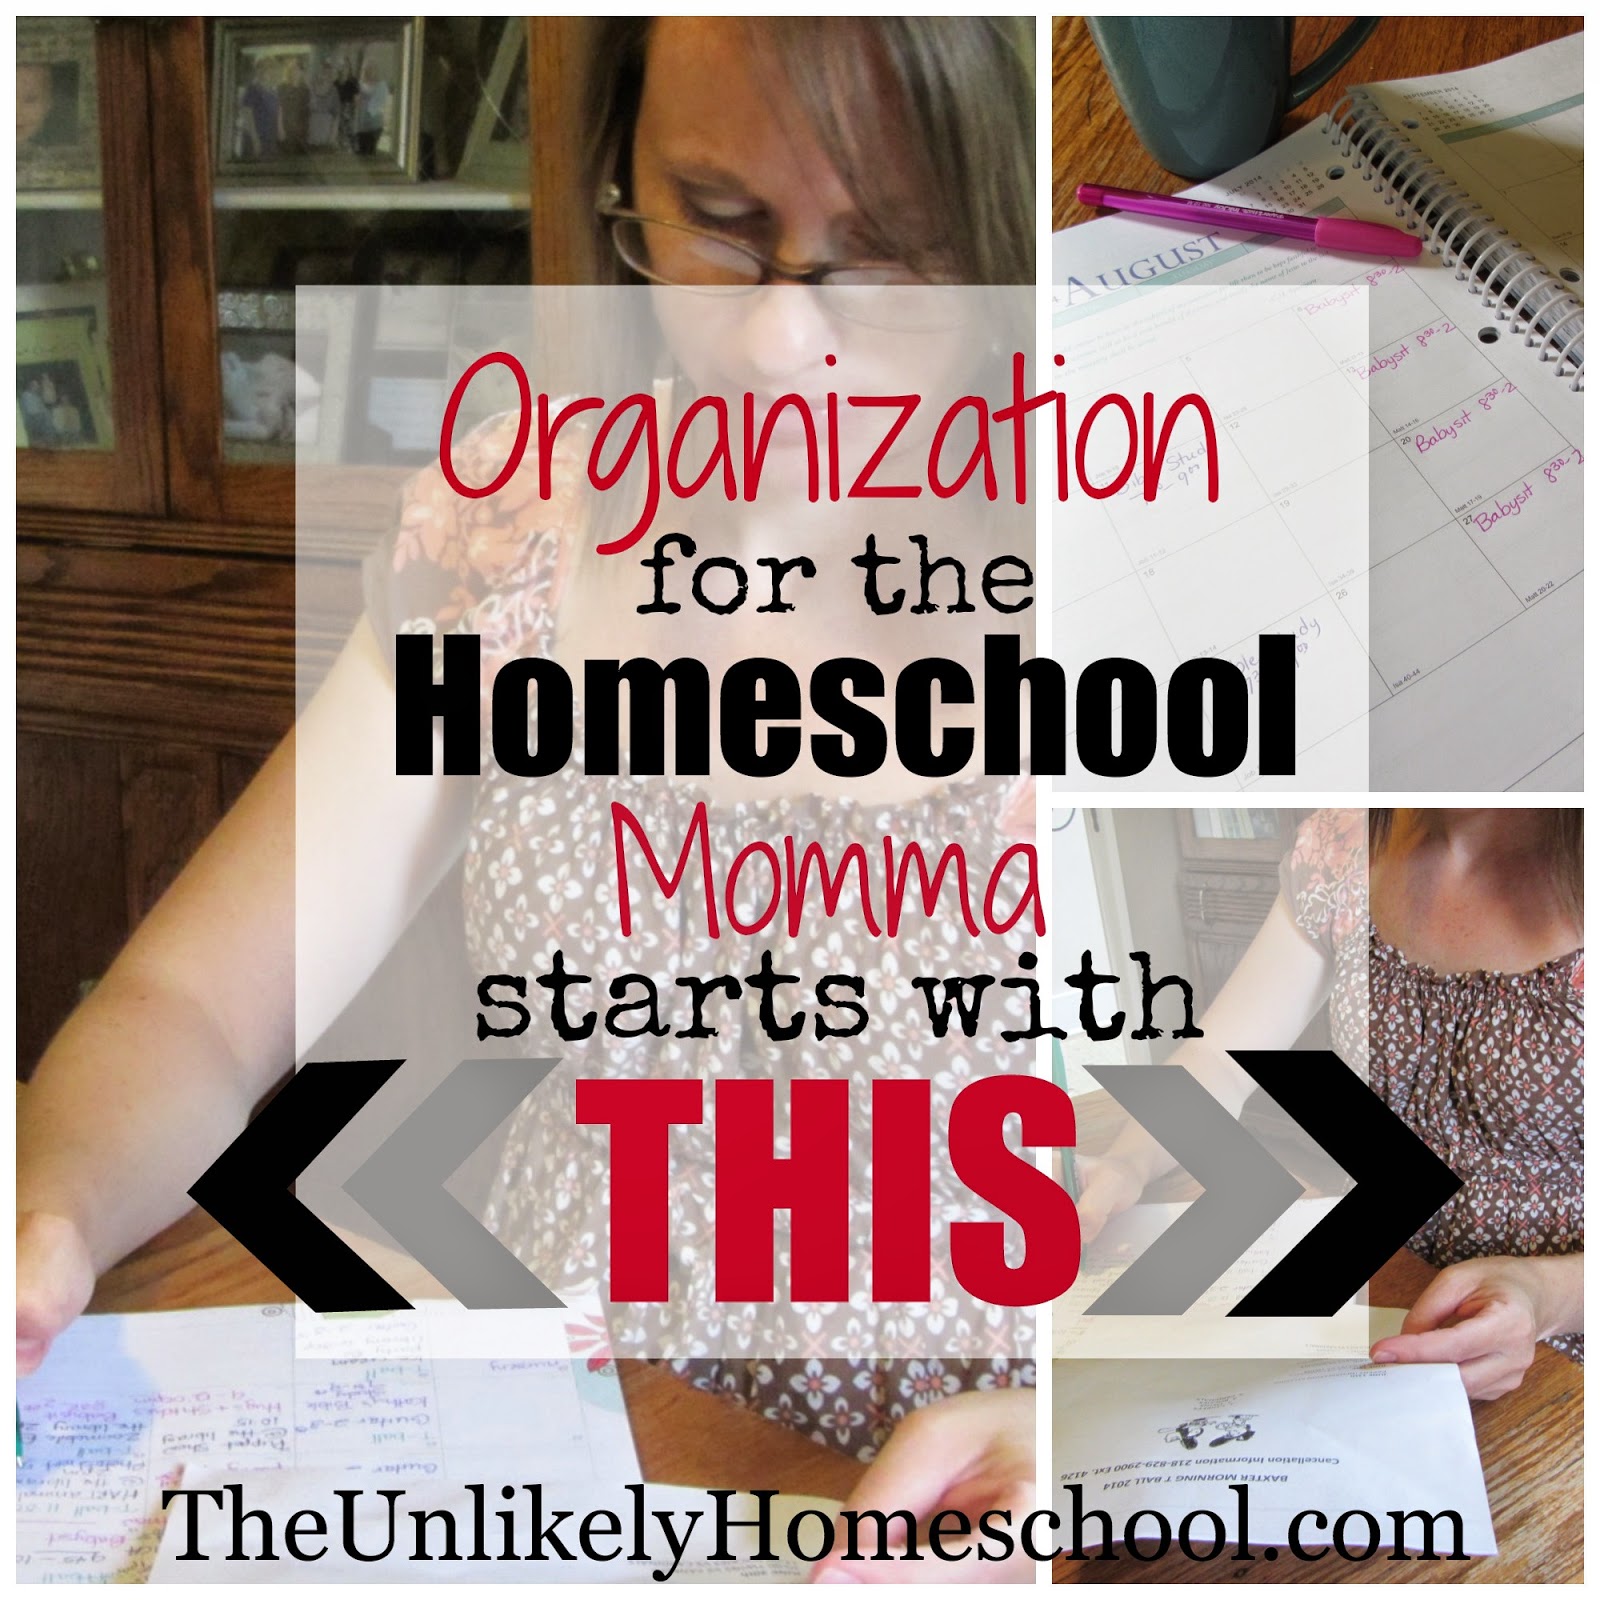 My {BIG FAT} List of 100 Resources for the Newbie Homeschooler {The Unlikely Homeschool}